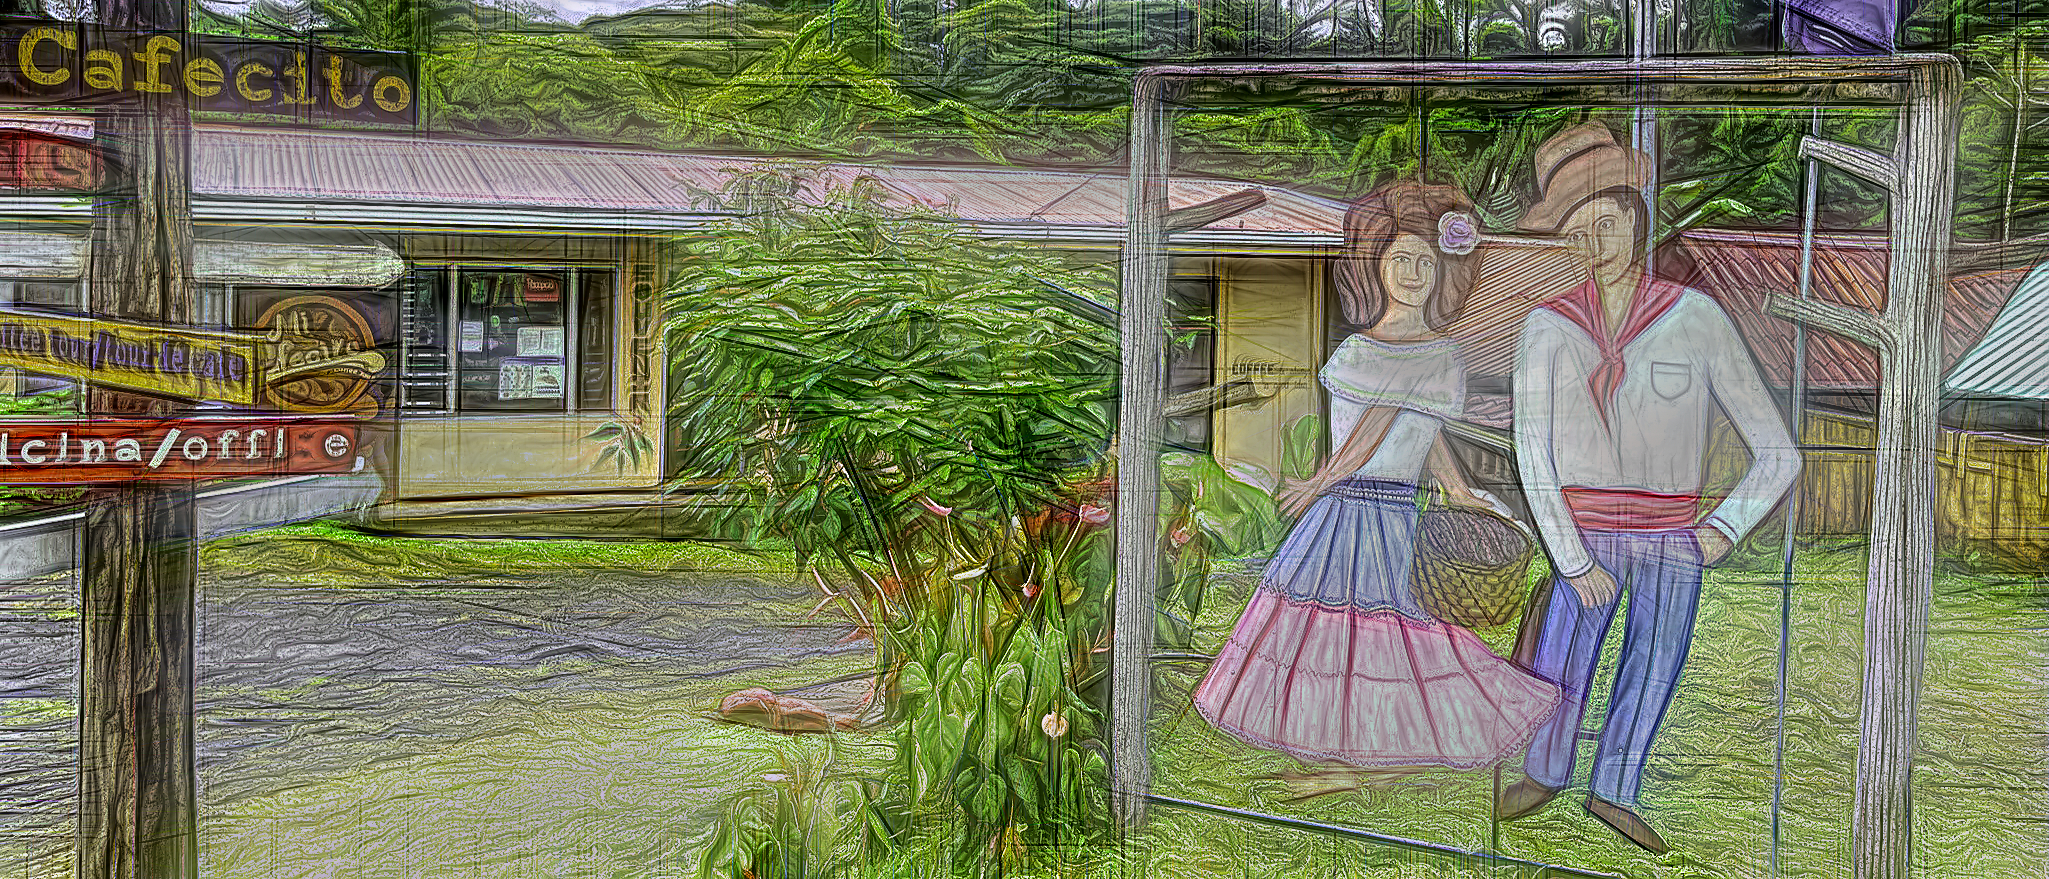 Painting of Coasta Rican couple at entrance to coffee plantation